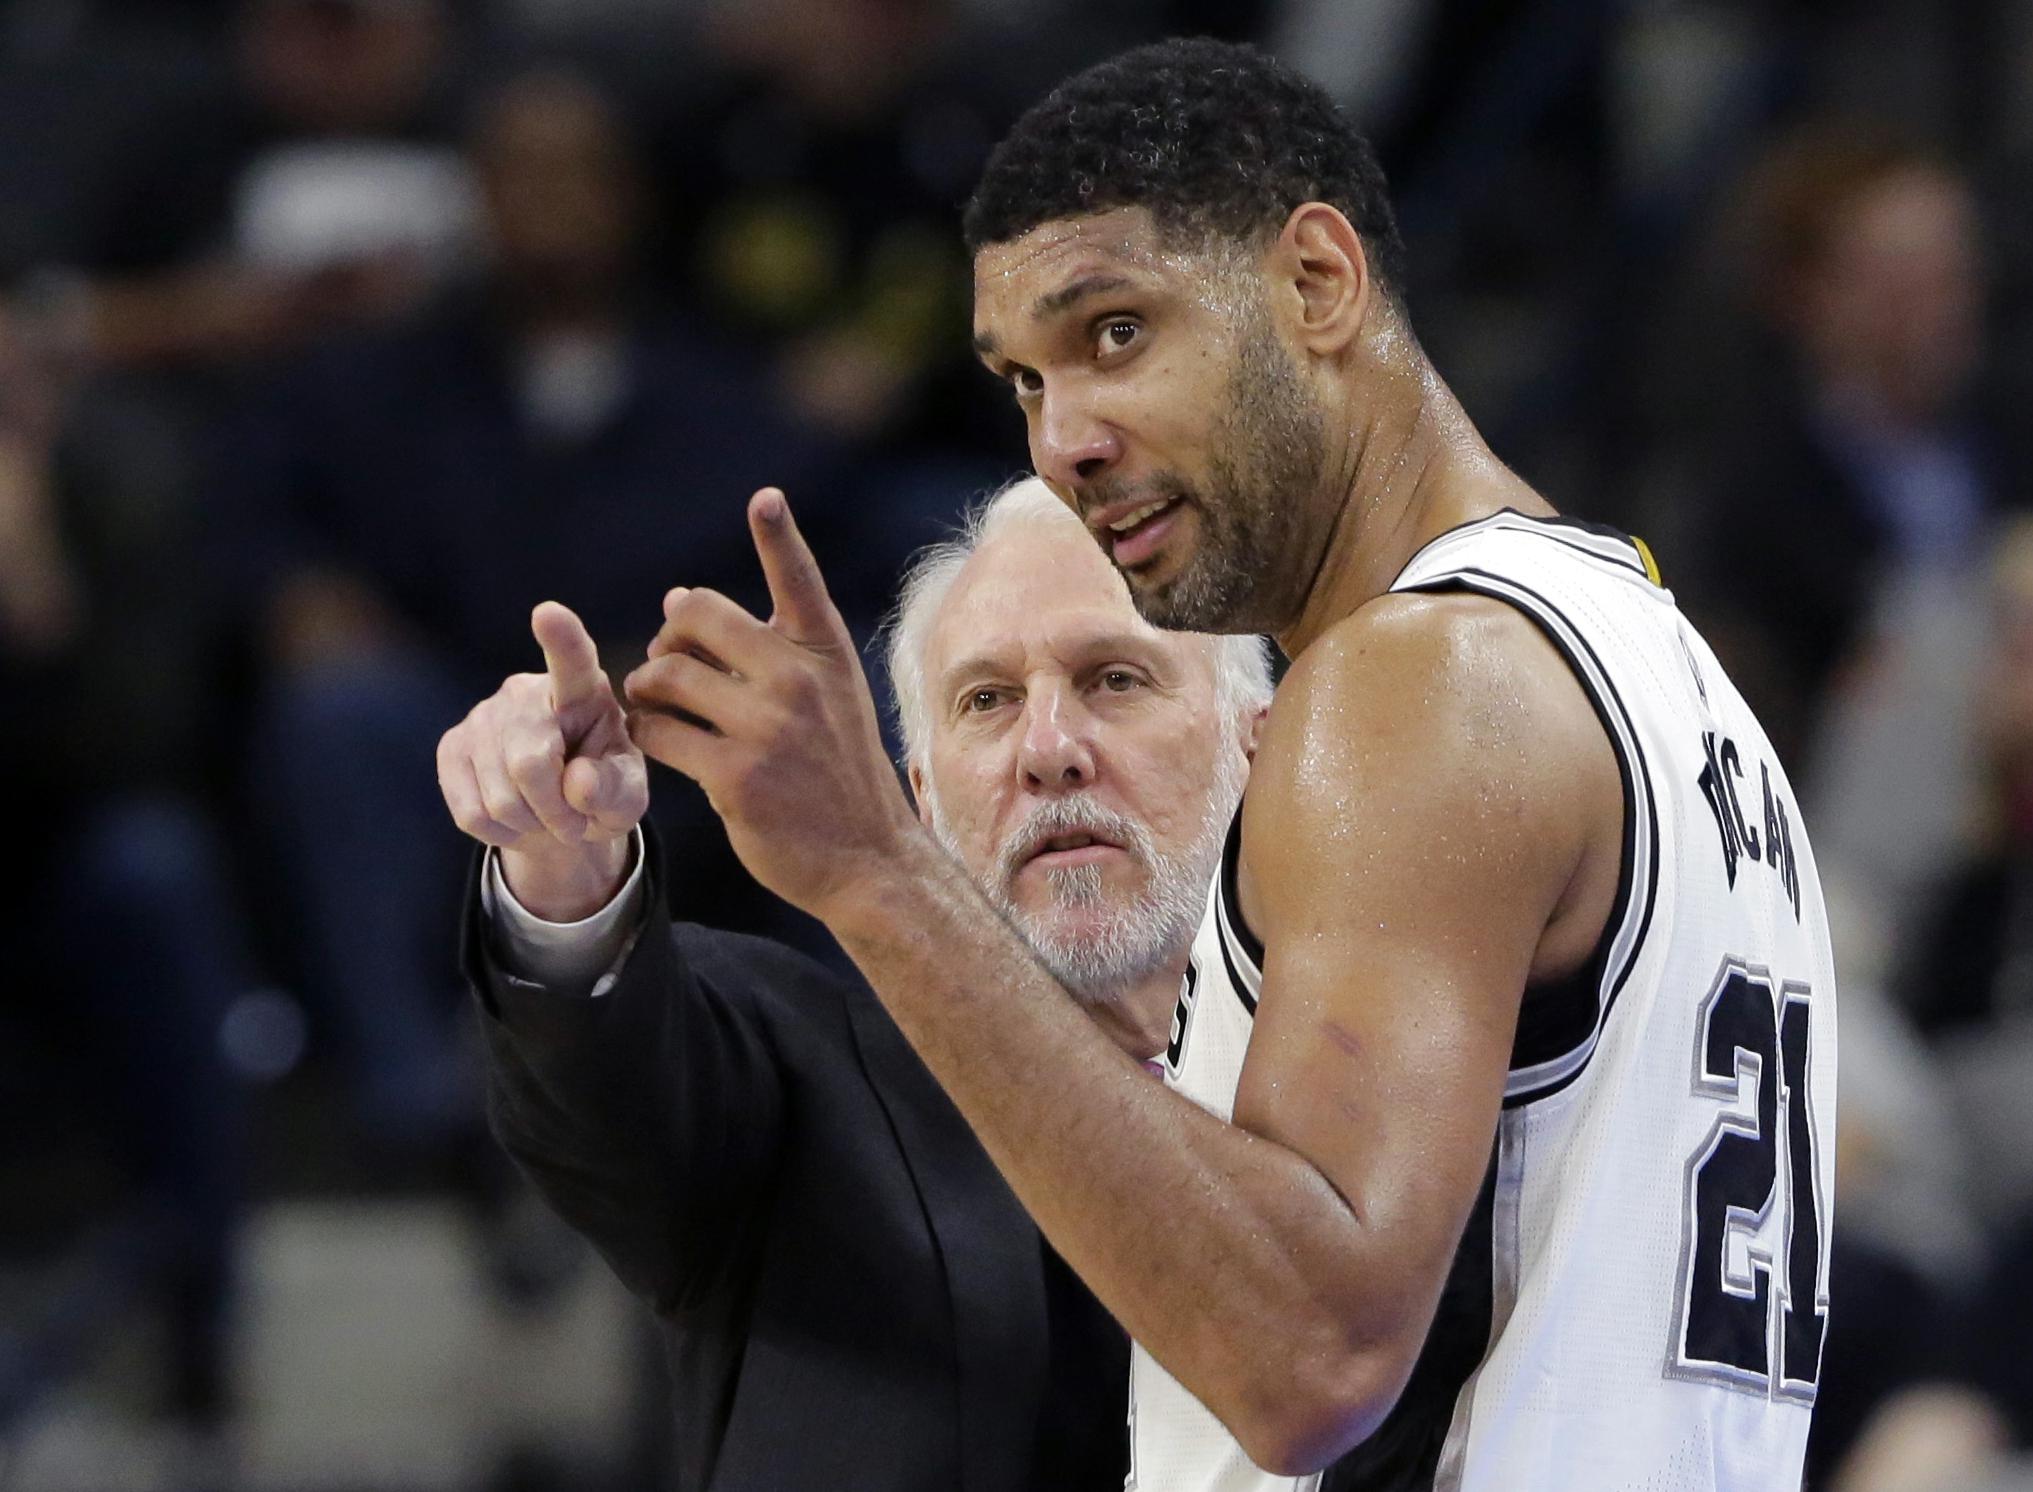 Gregg Popovich skips game to attend Duncan's Hall of Fame